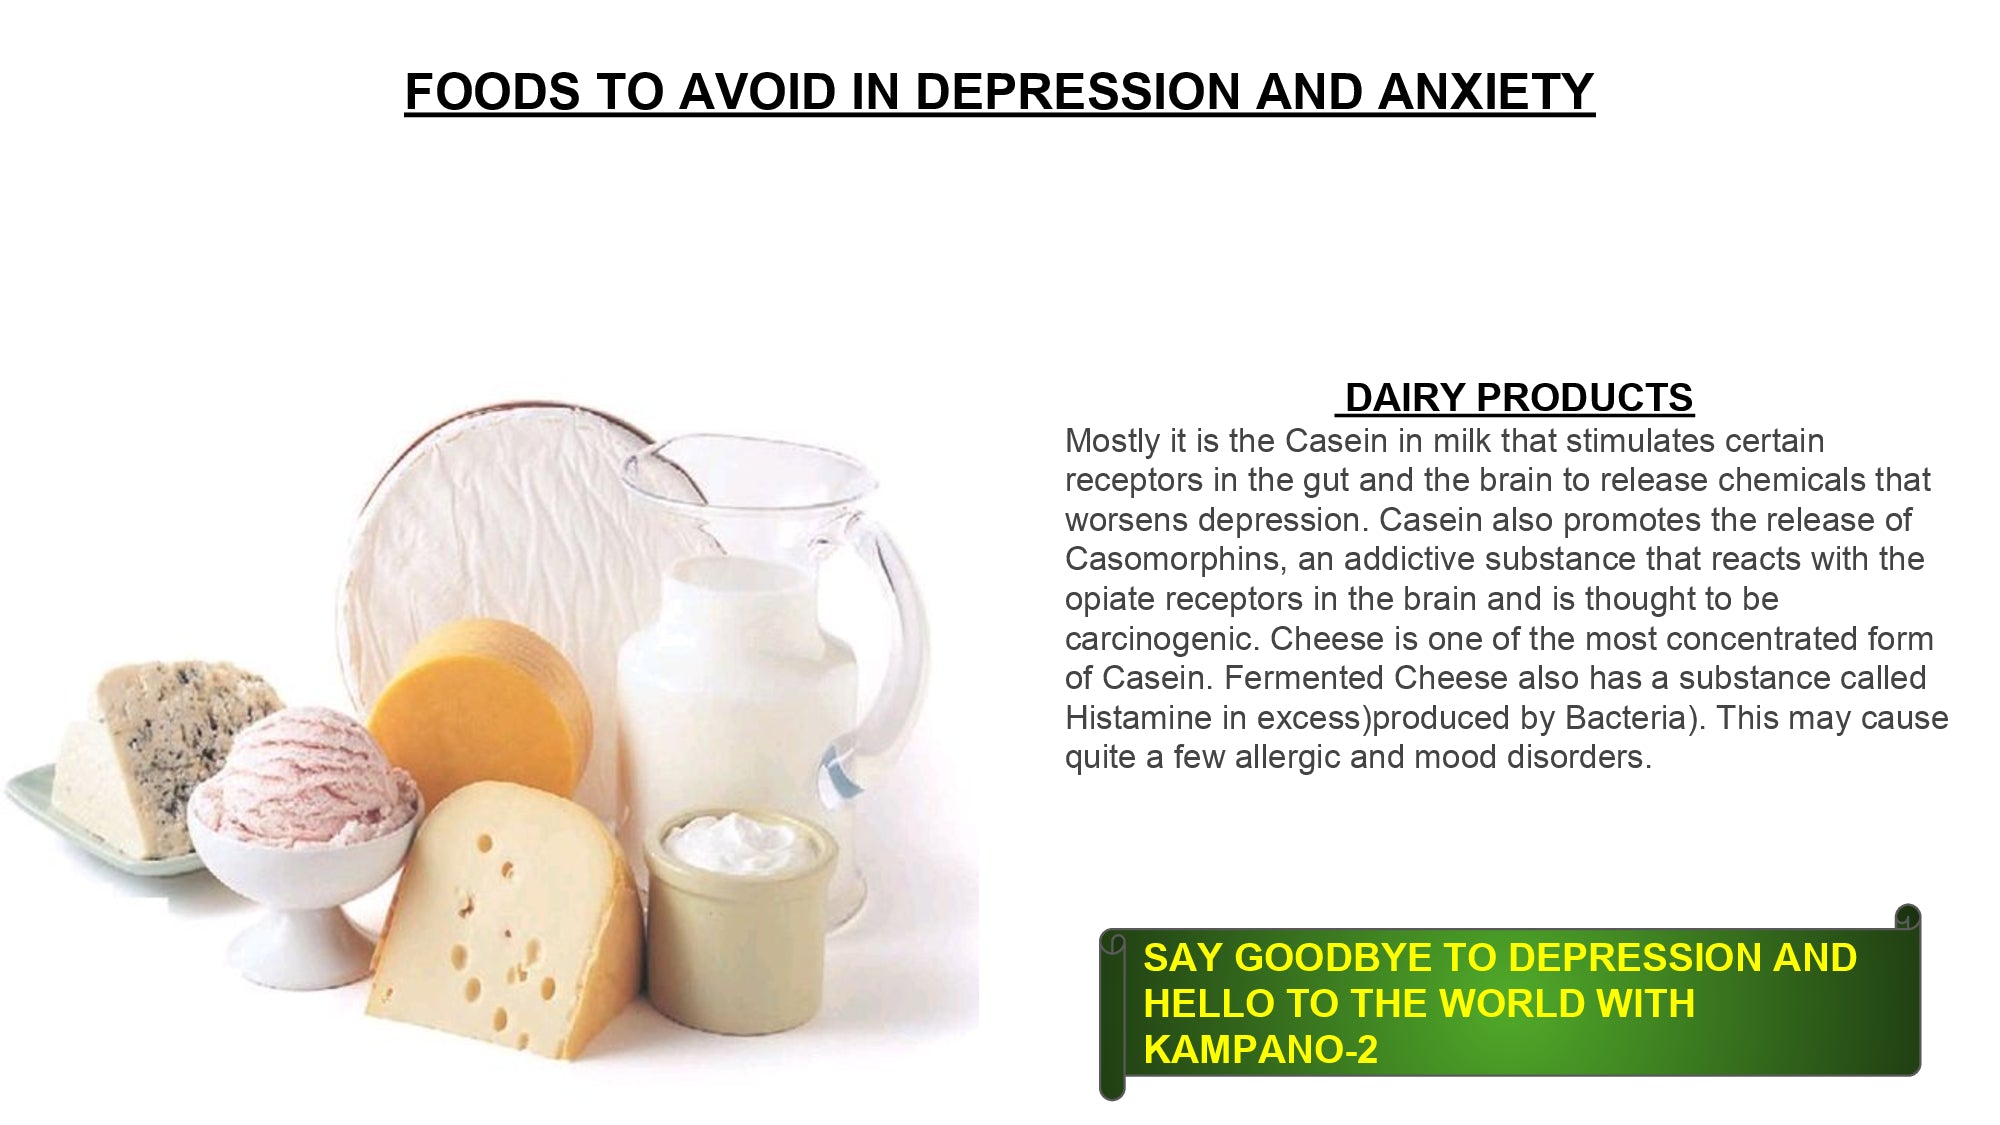 types of dairy products cause depression cheese milk ice cream